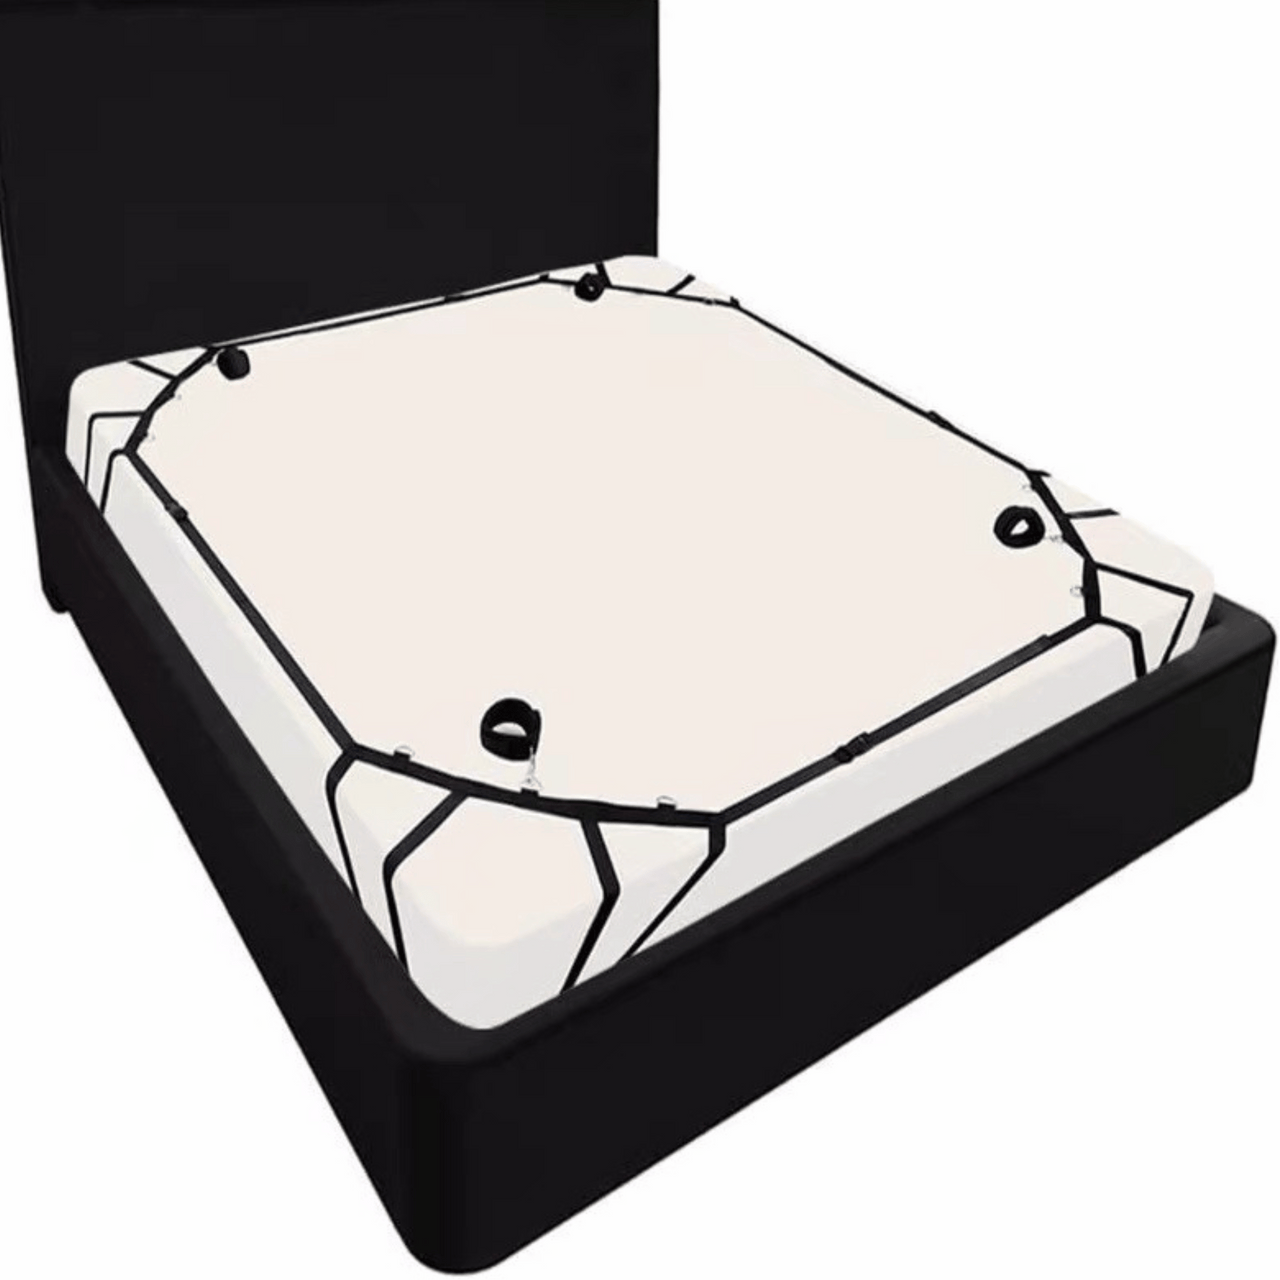 Bed Straps Restraint Bondage System for King & Queen Mattress Experience Enhanced Adult Play with Discreet Easy Installation and Secure Cuffs